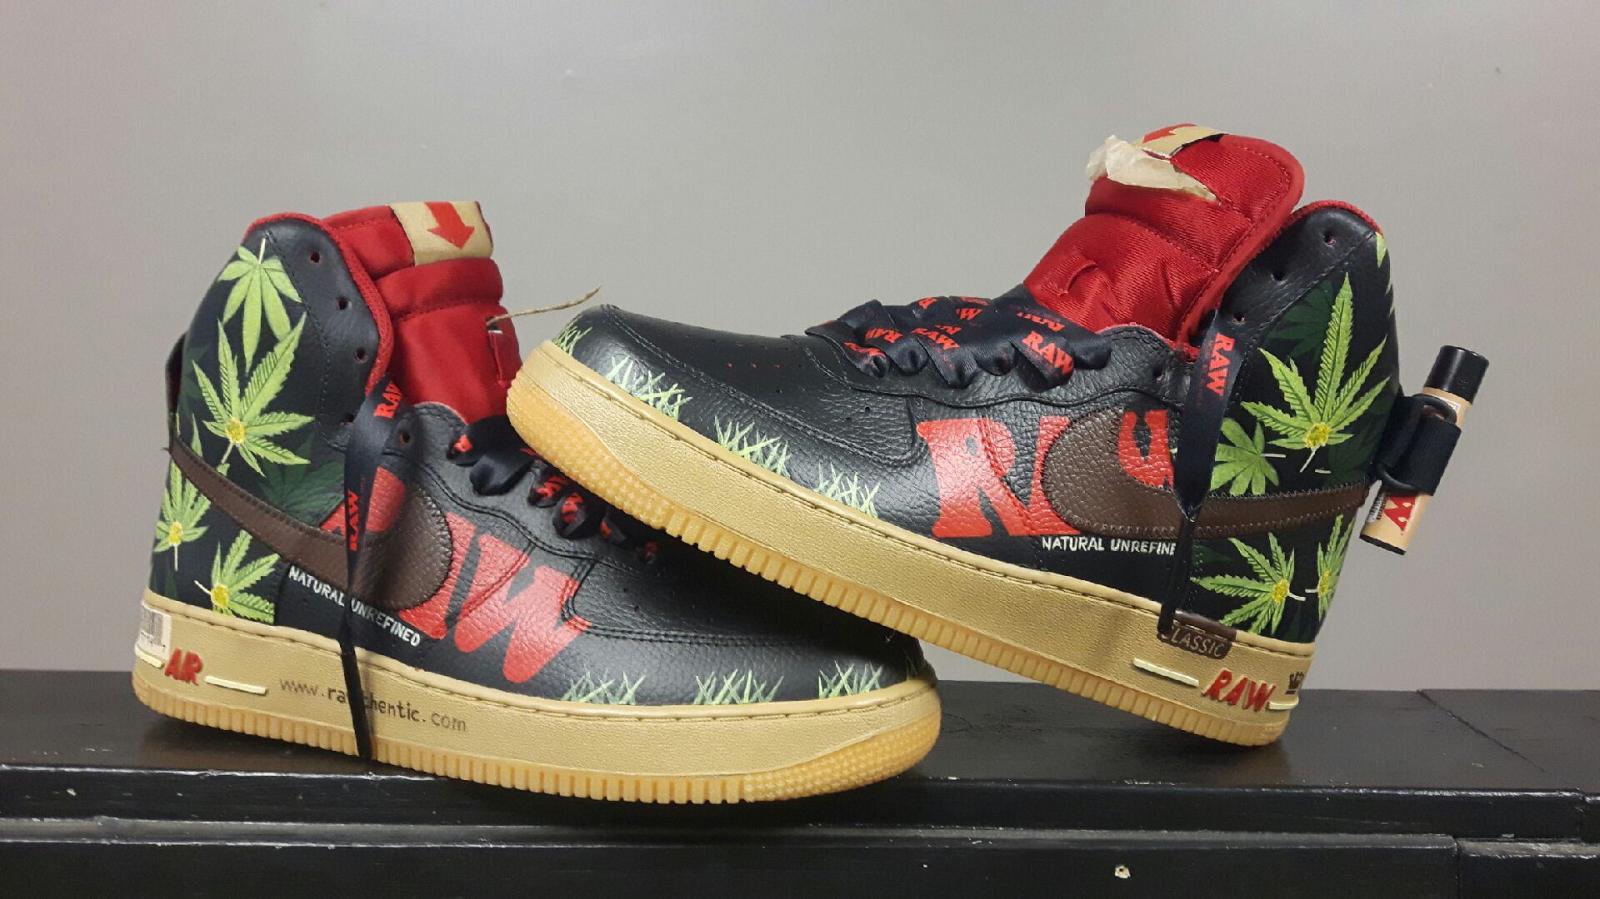 Reprimir Departamento censura triplesick on Twitter: "The long awaited RAW custom Nike Air Force 1's  arrived today https://t.co/aACCh6ZQWr" / Twitter